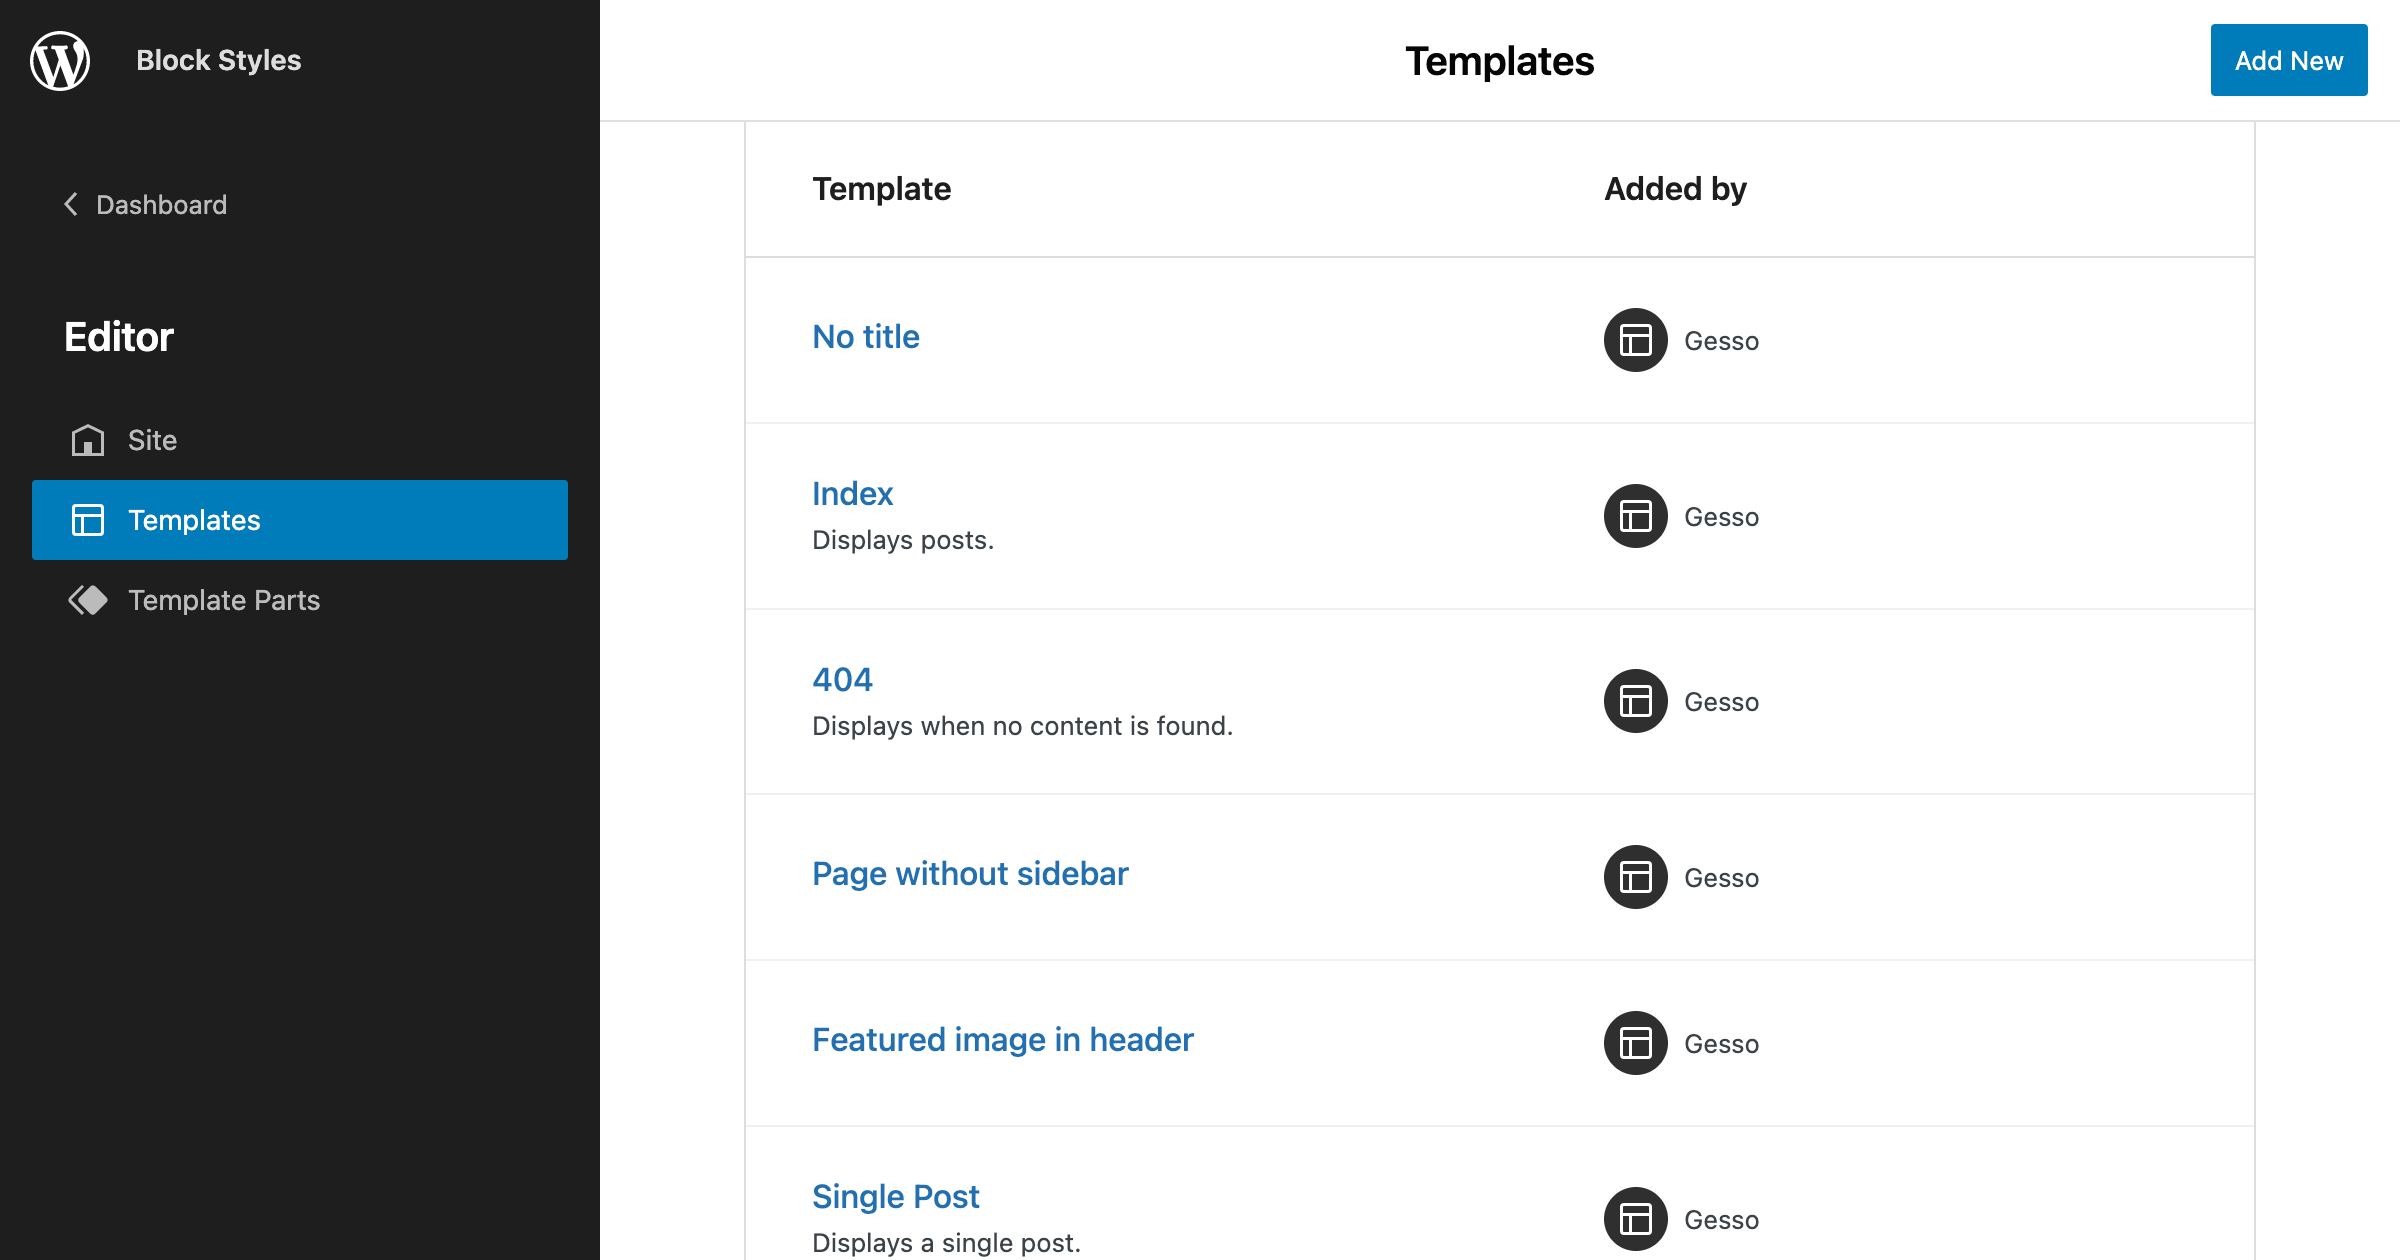 Access your theme template with one click.